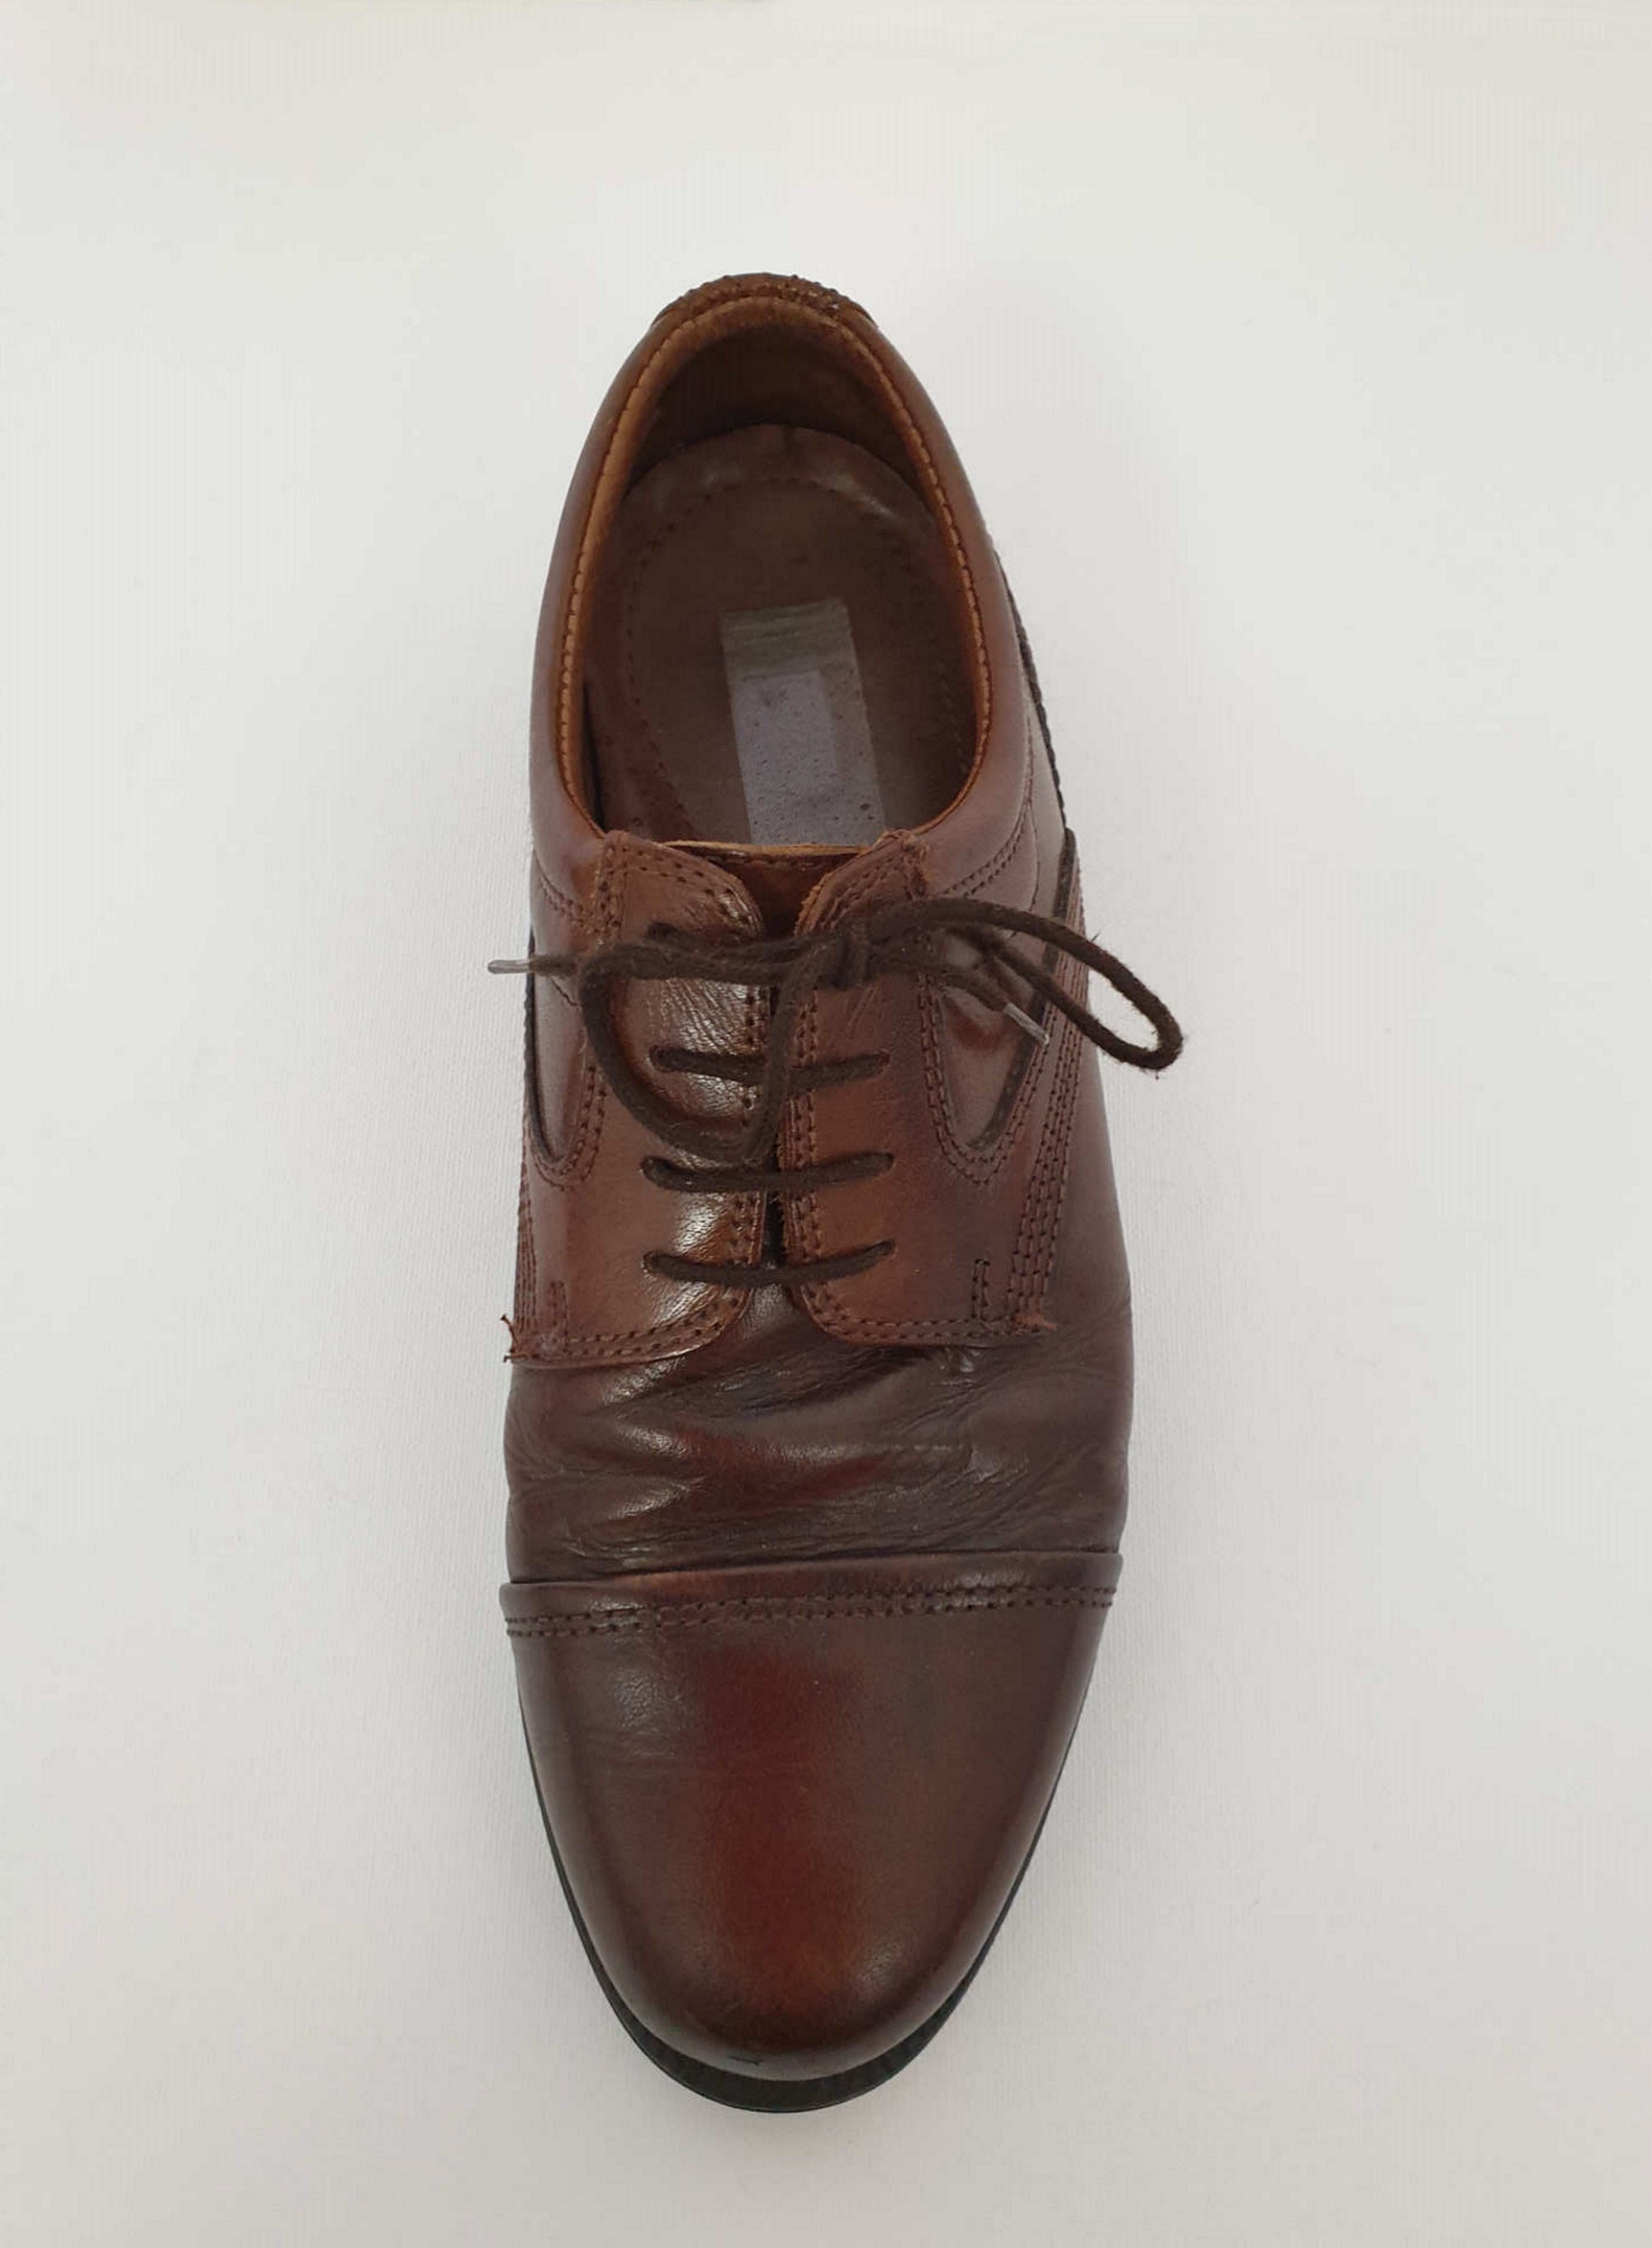 vintage brown leather mens shoes derby lace ups by julius marlow